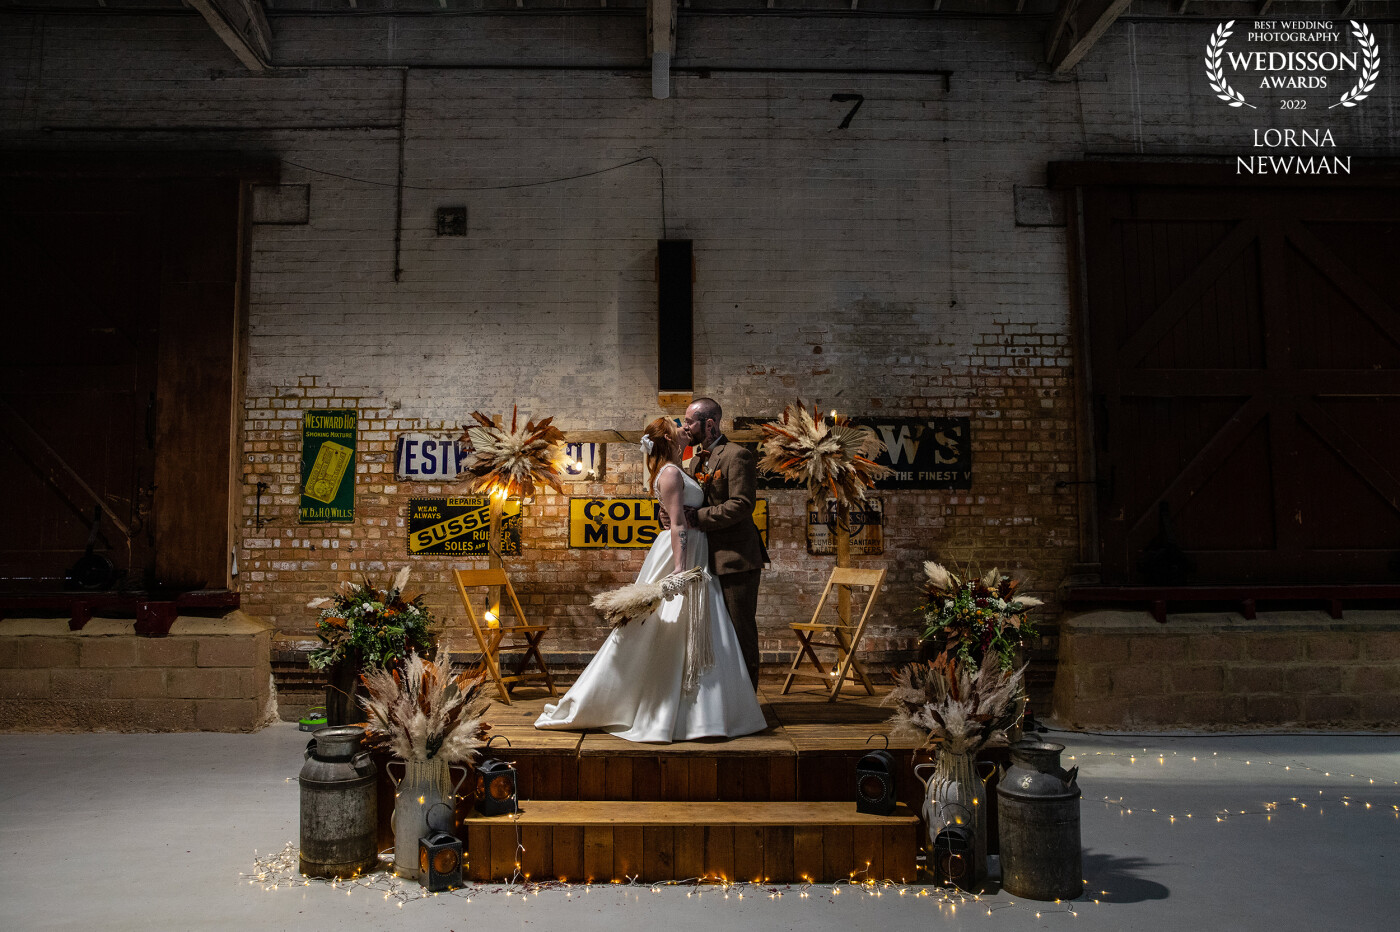 A shot from Ben & Cara's magical wedding at Rushden Transport Museum. The warm orange tones and meticulously planned details from this wedding blew me away, it was beautiful. It was such a pleasure to see these two get married. Congratulations Ben & Cara .<br />
<br />
<br />
<br />
<br />
Venue - @RushdenHigham&WellingboroughRailway<br />
Celebrant - @Billiesavannahceremonies<br />
Flowers - @FoxgloveFlorals<br />
Make up @beauty.by.kristen<br />
Hair @hairbypapaya<br />
Men’s suits - @TheVintageSuitHireCompany<br />
Venue dressing - @Rustichire<br />
Band - @thetrolliesband @edjoewood <br />
Nail art @kitija.absolutebeauty.salon <br />
Dress - @WED2B